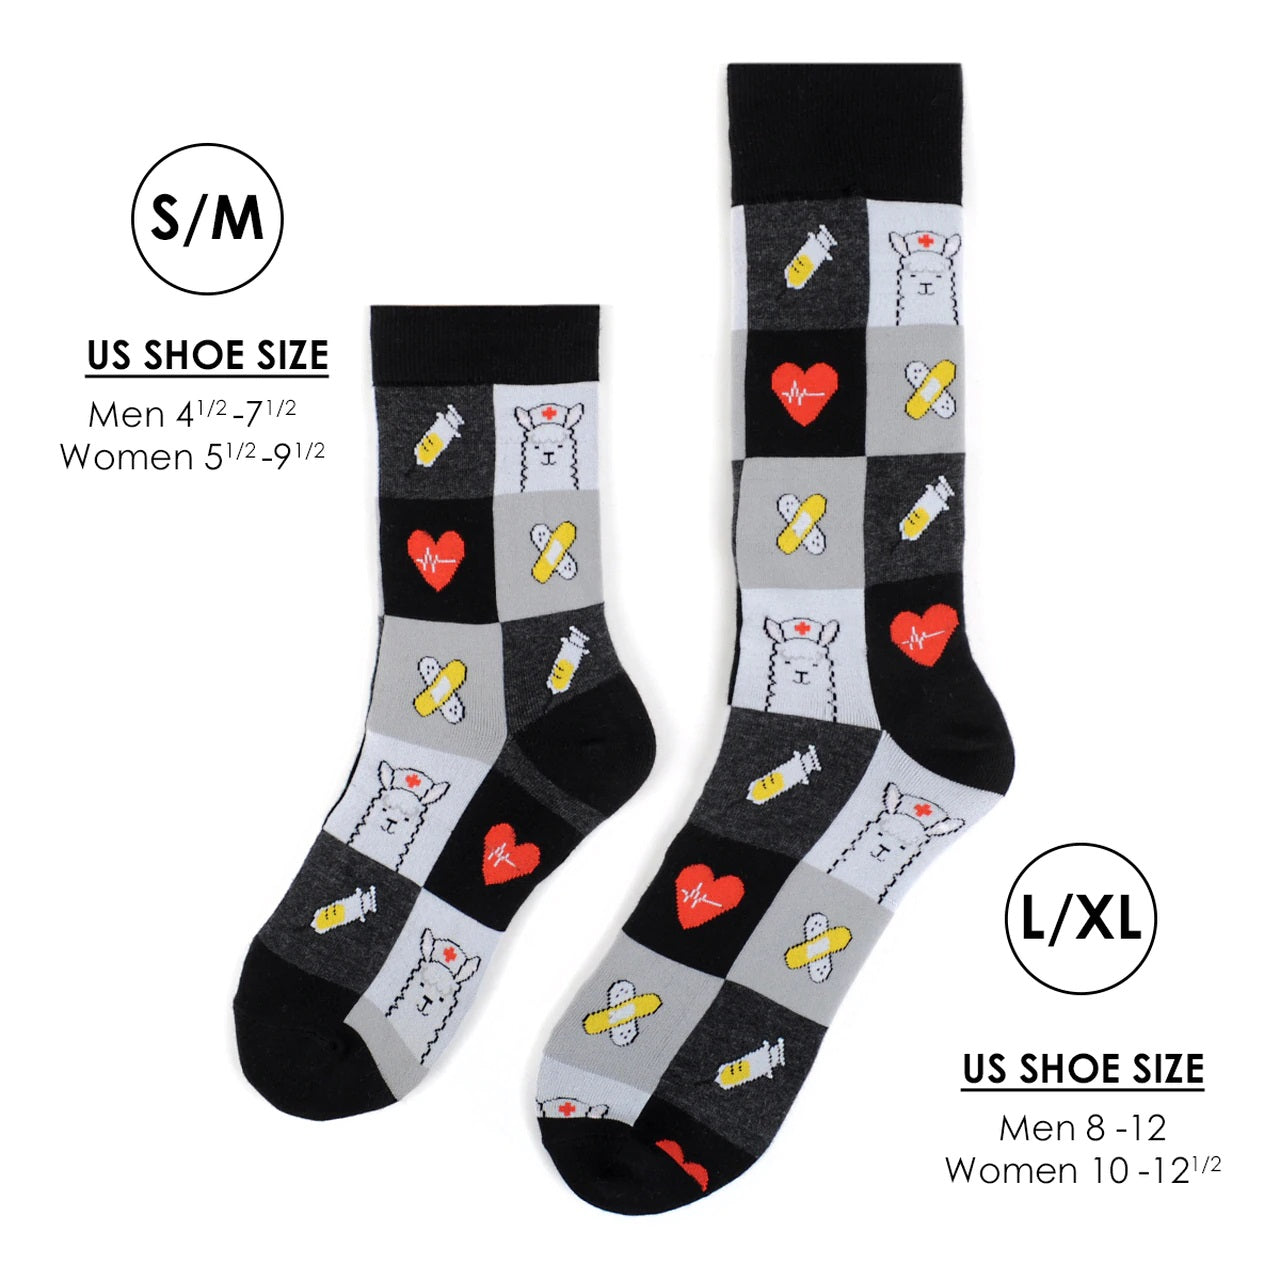 MashasCorner.com   Health Care Heroes -Nurse Llama - Ultra Premium Socks  Material: 68% cotton, 29% polyester, 3% spandex Sizes: available in S/M and L/XL S/M: men shoe size: 4.5-7.5, ladies shoe size: 5.5-9.5 L/XL: men shoe size: 8-12, ladies shoe size: 10-10.5 Unisex style